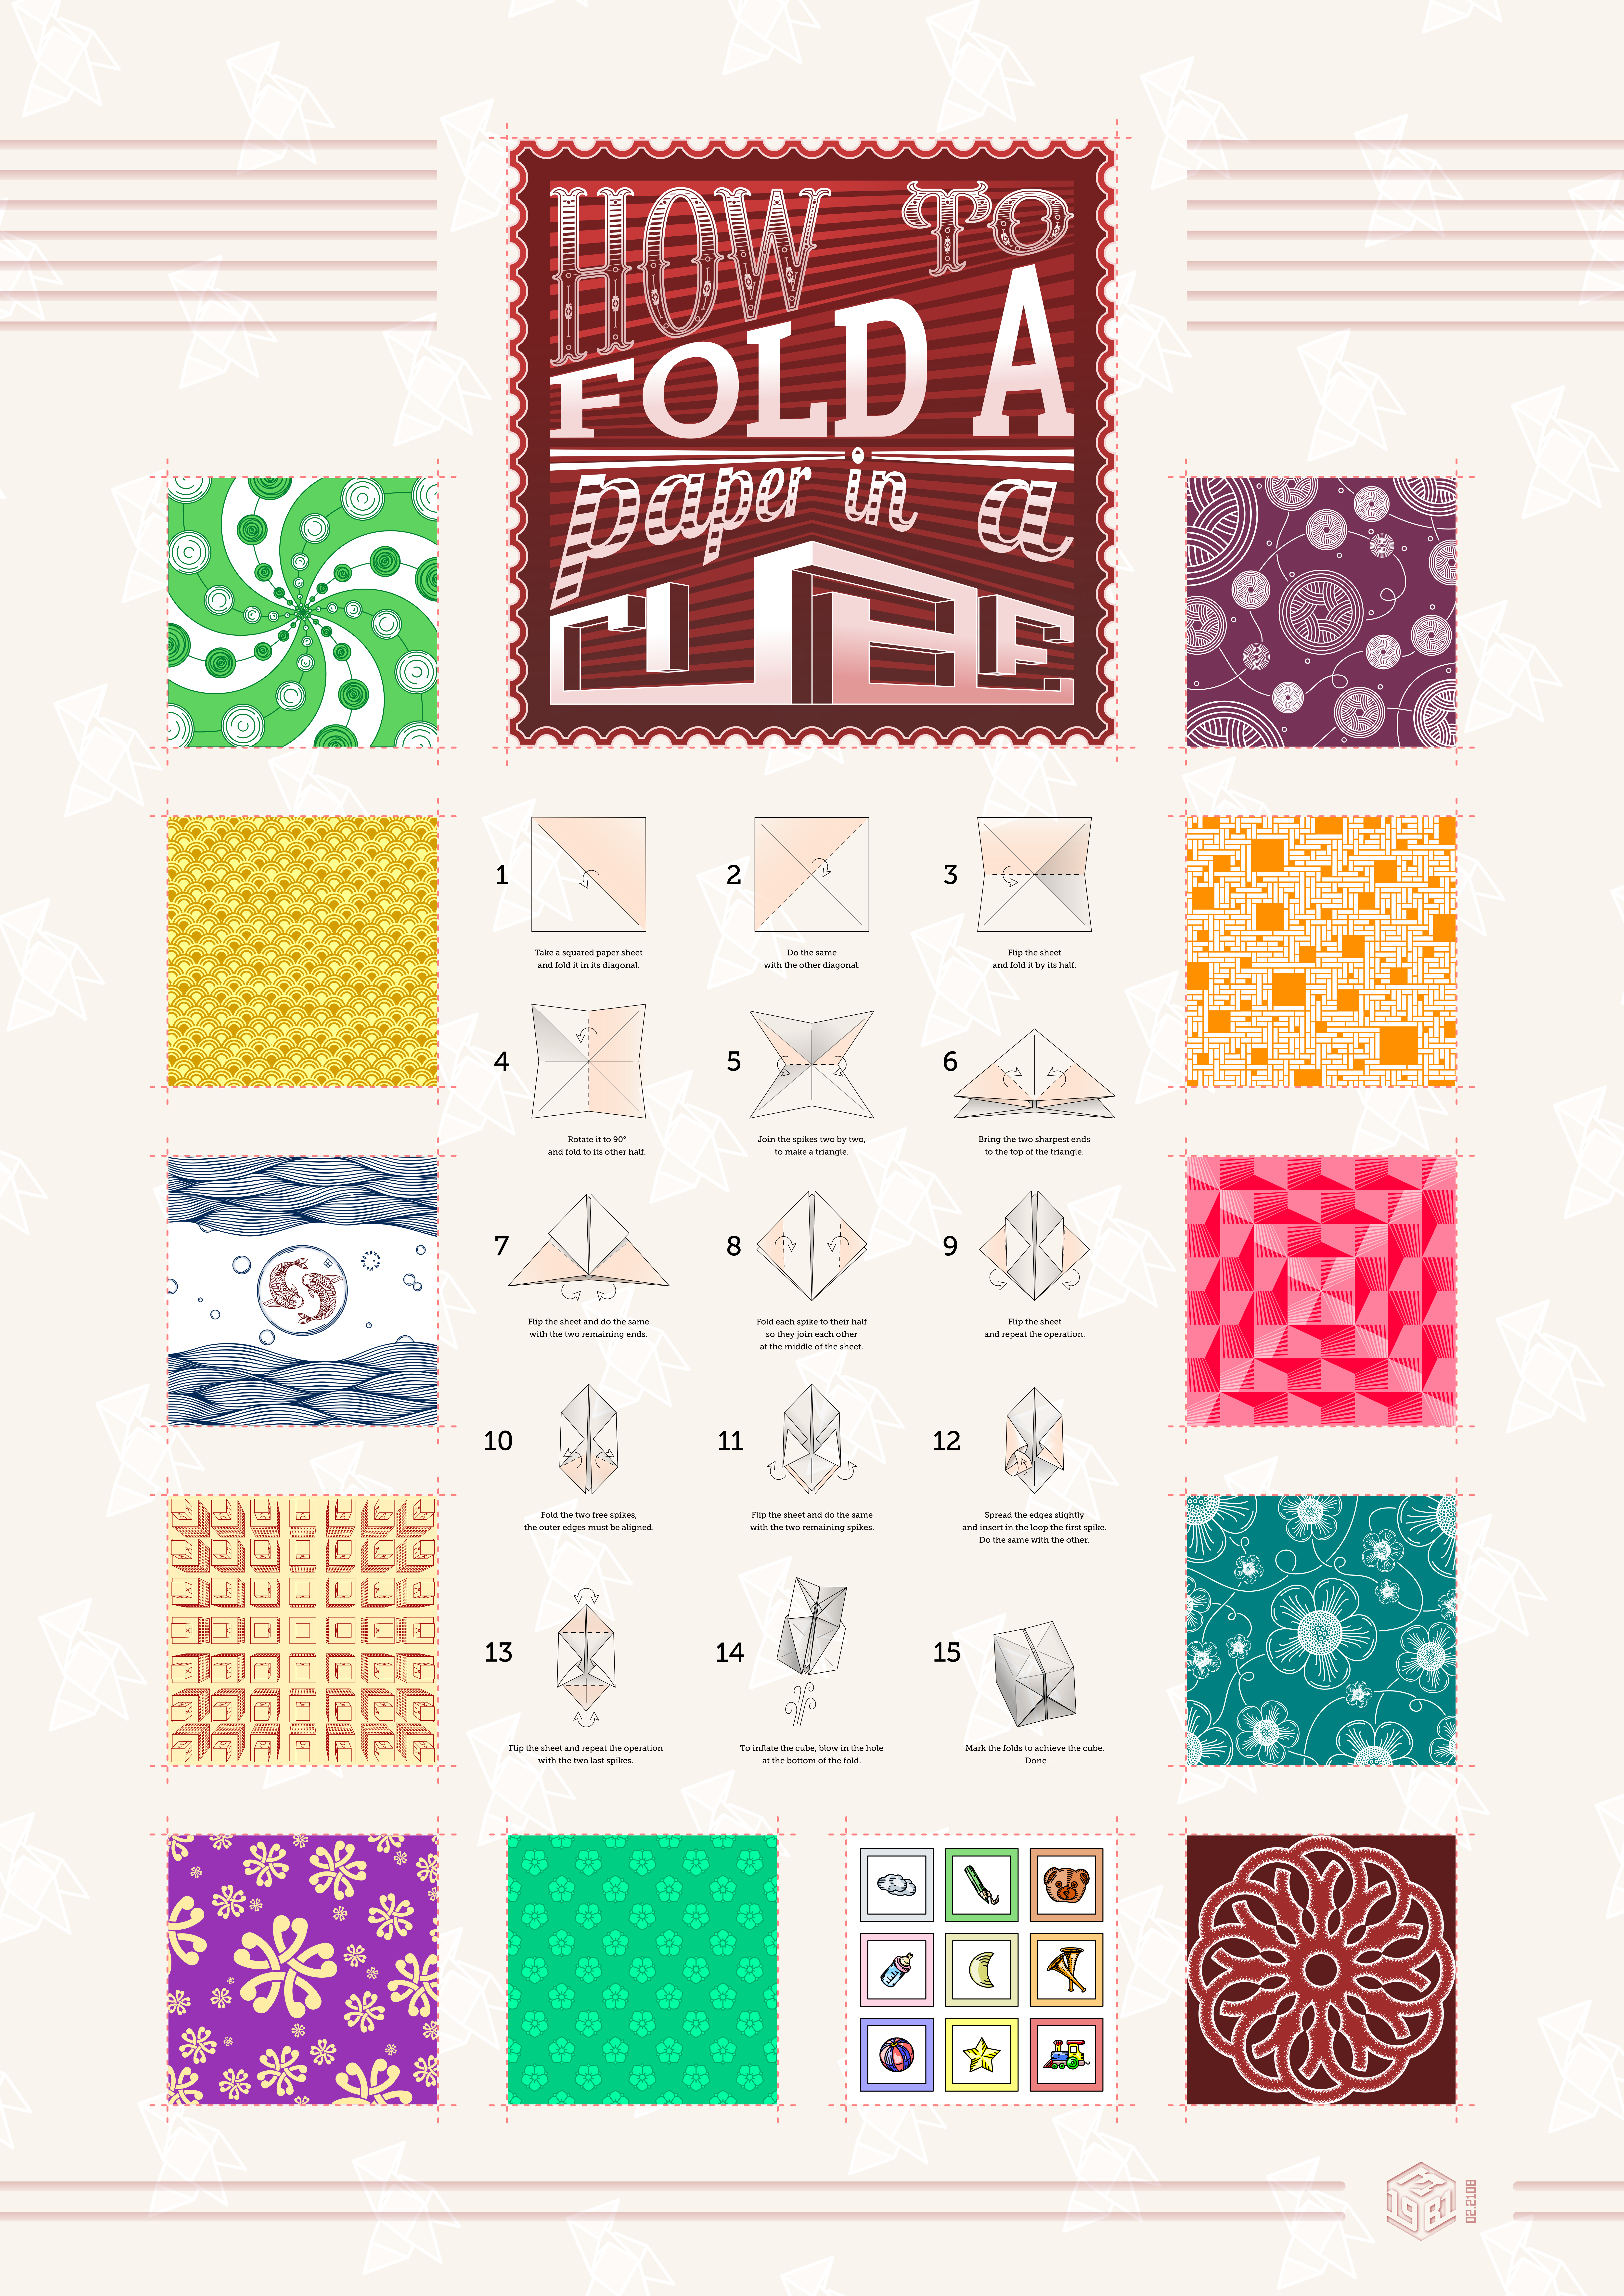 How to fold a paper in cube